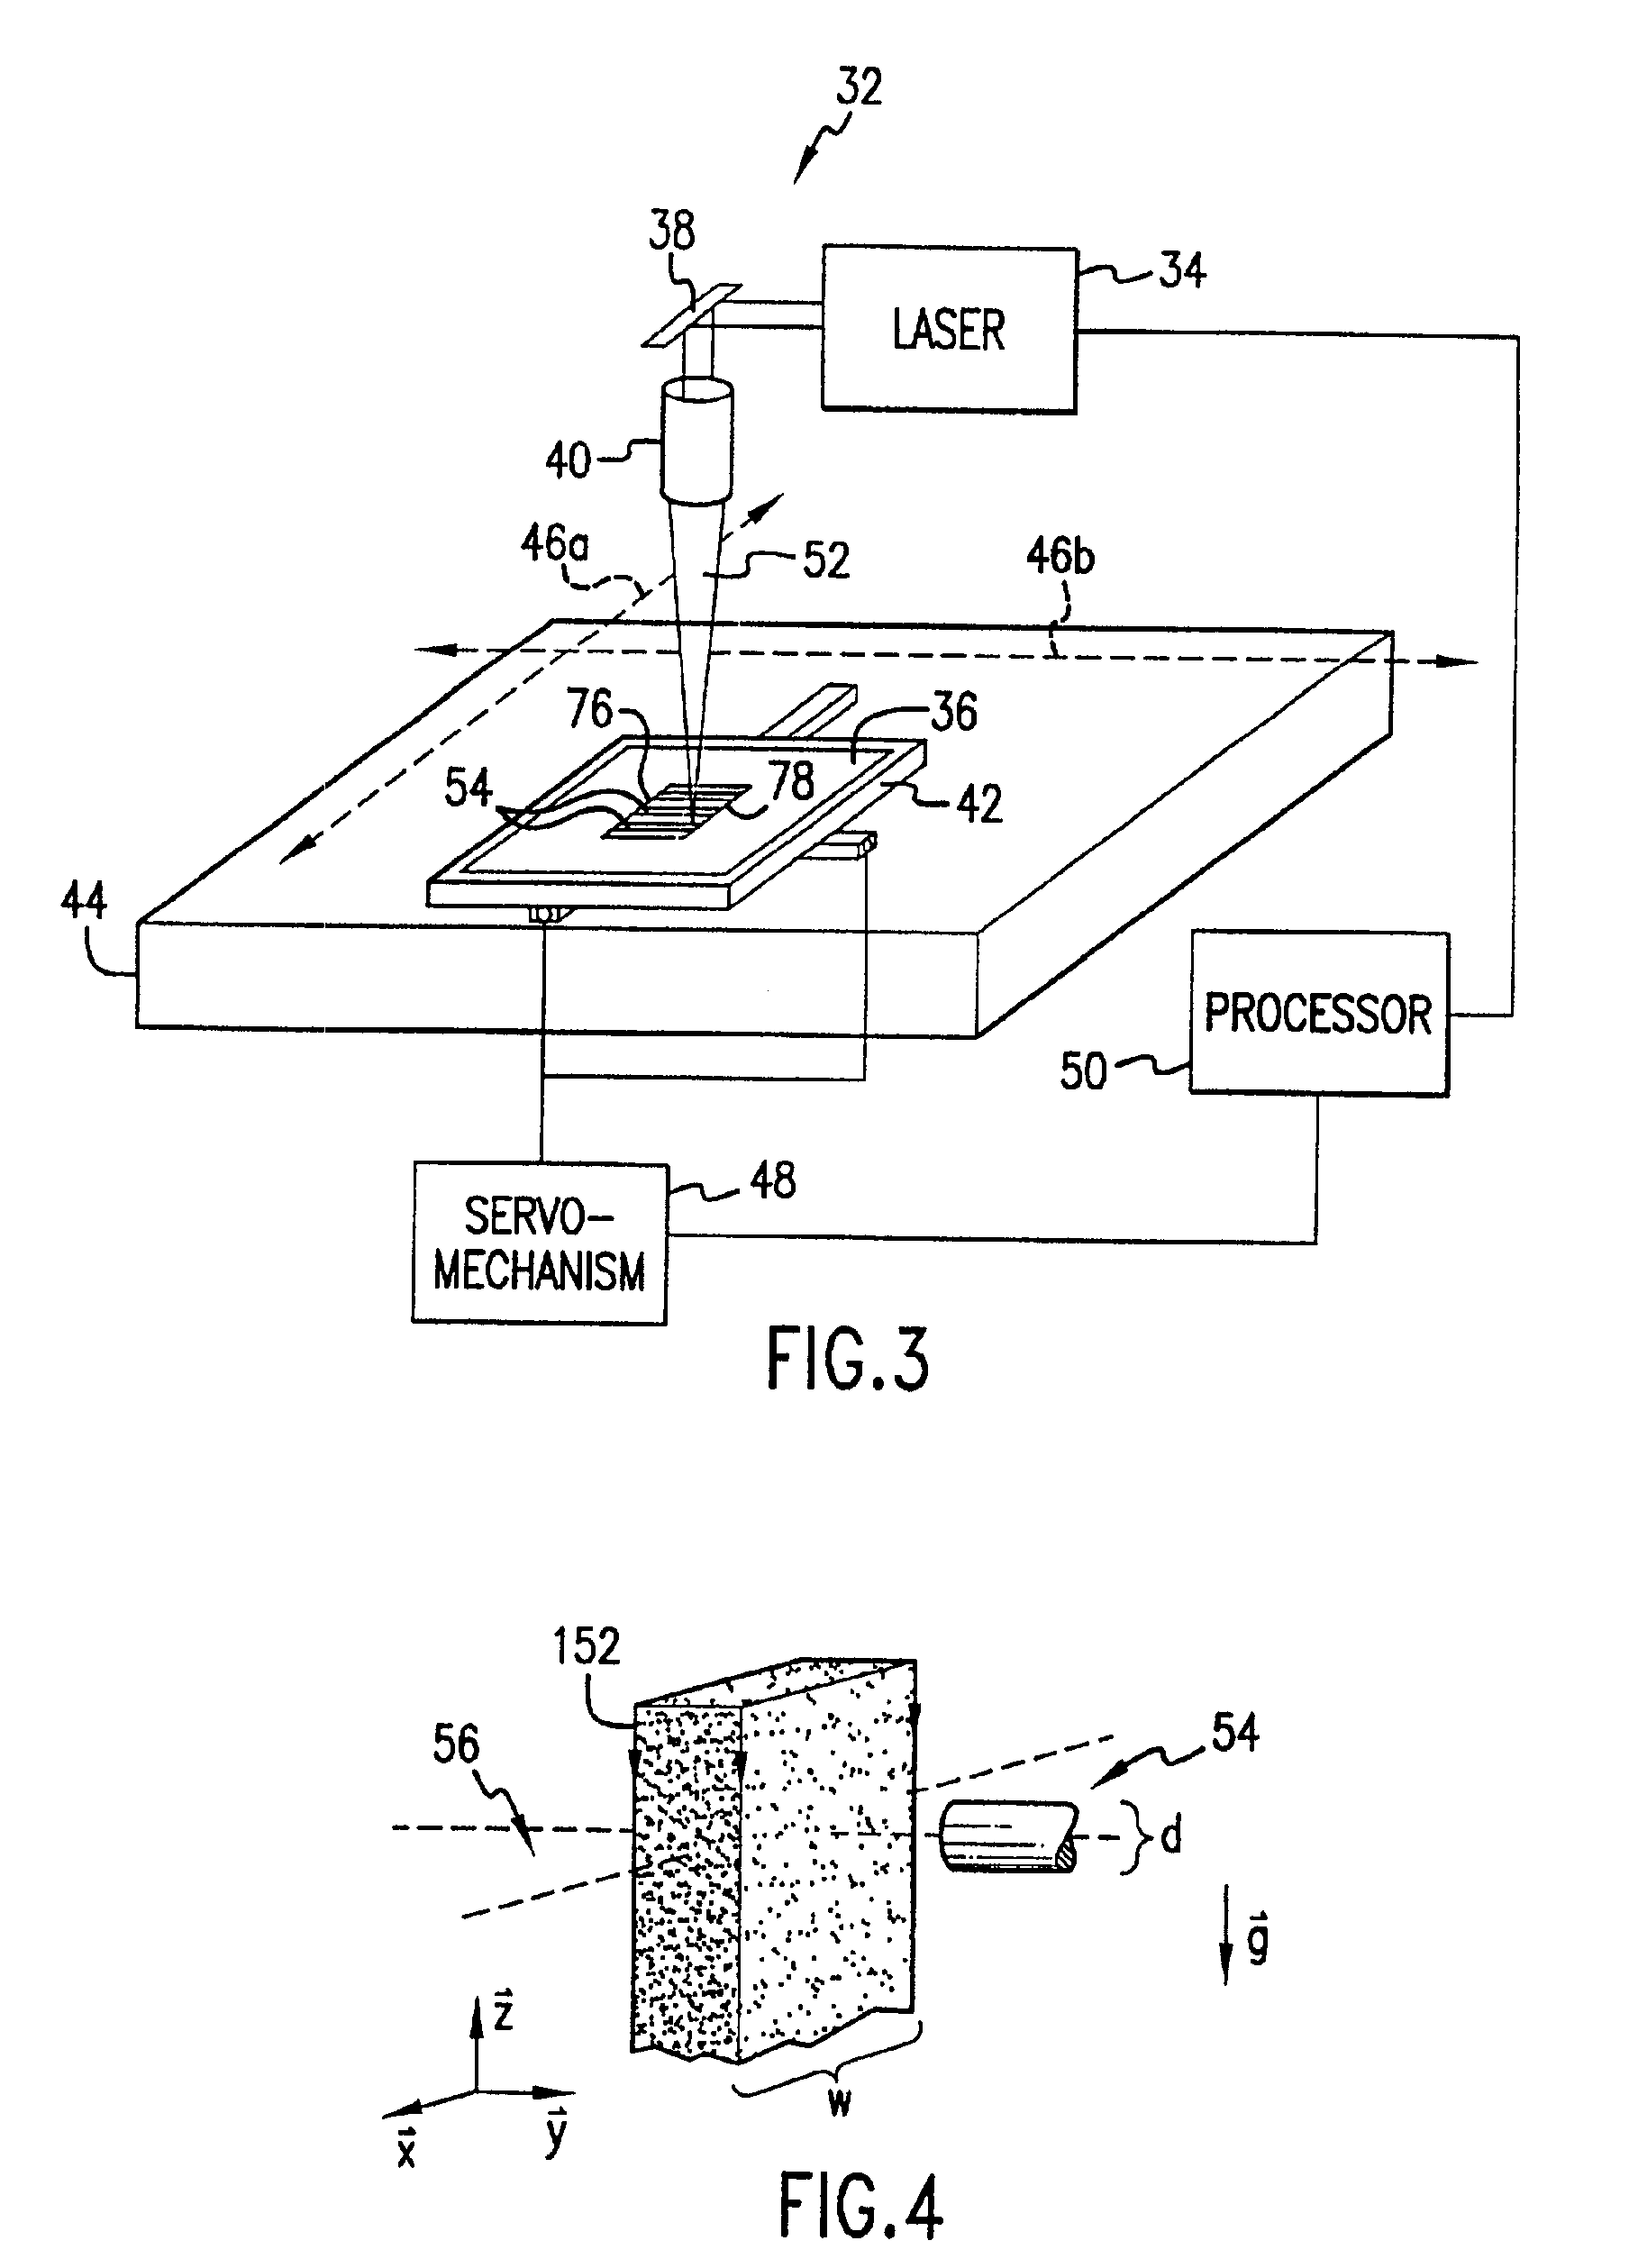 System for thermal shaping of optical fibers